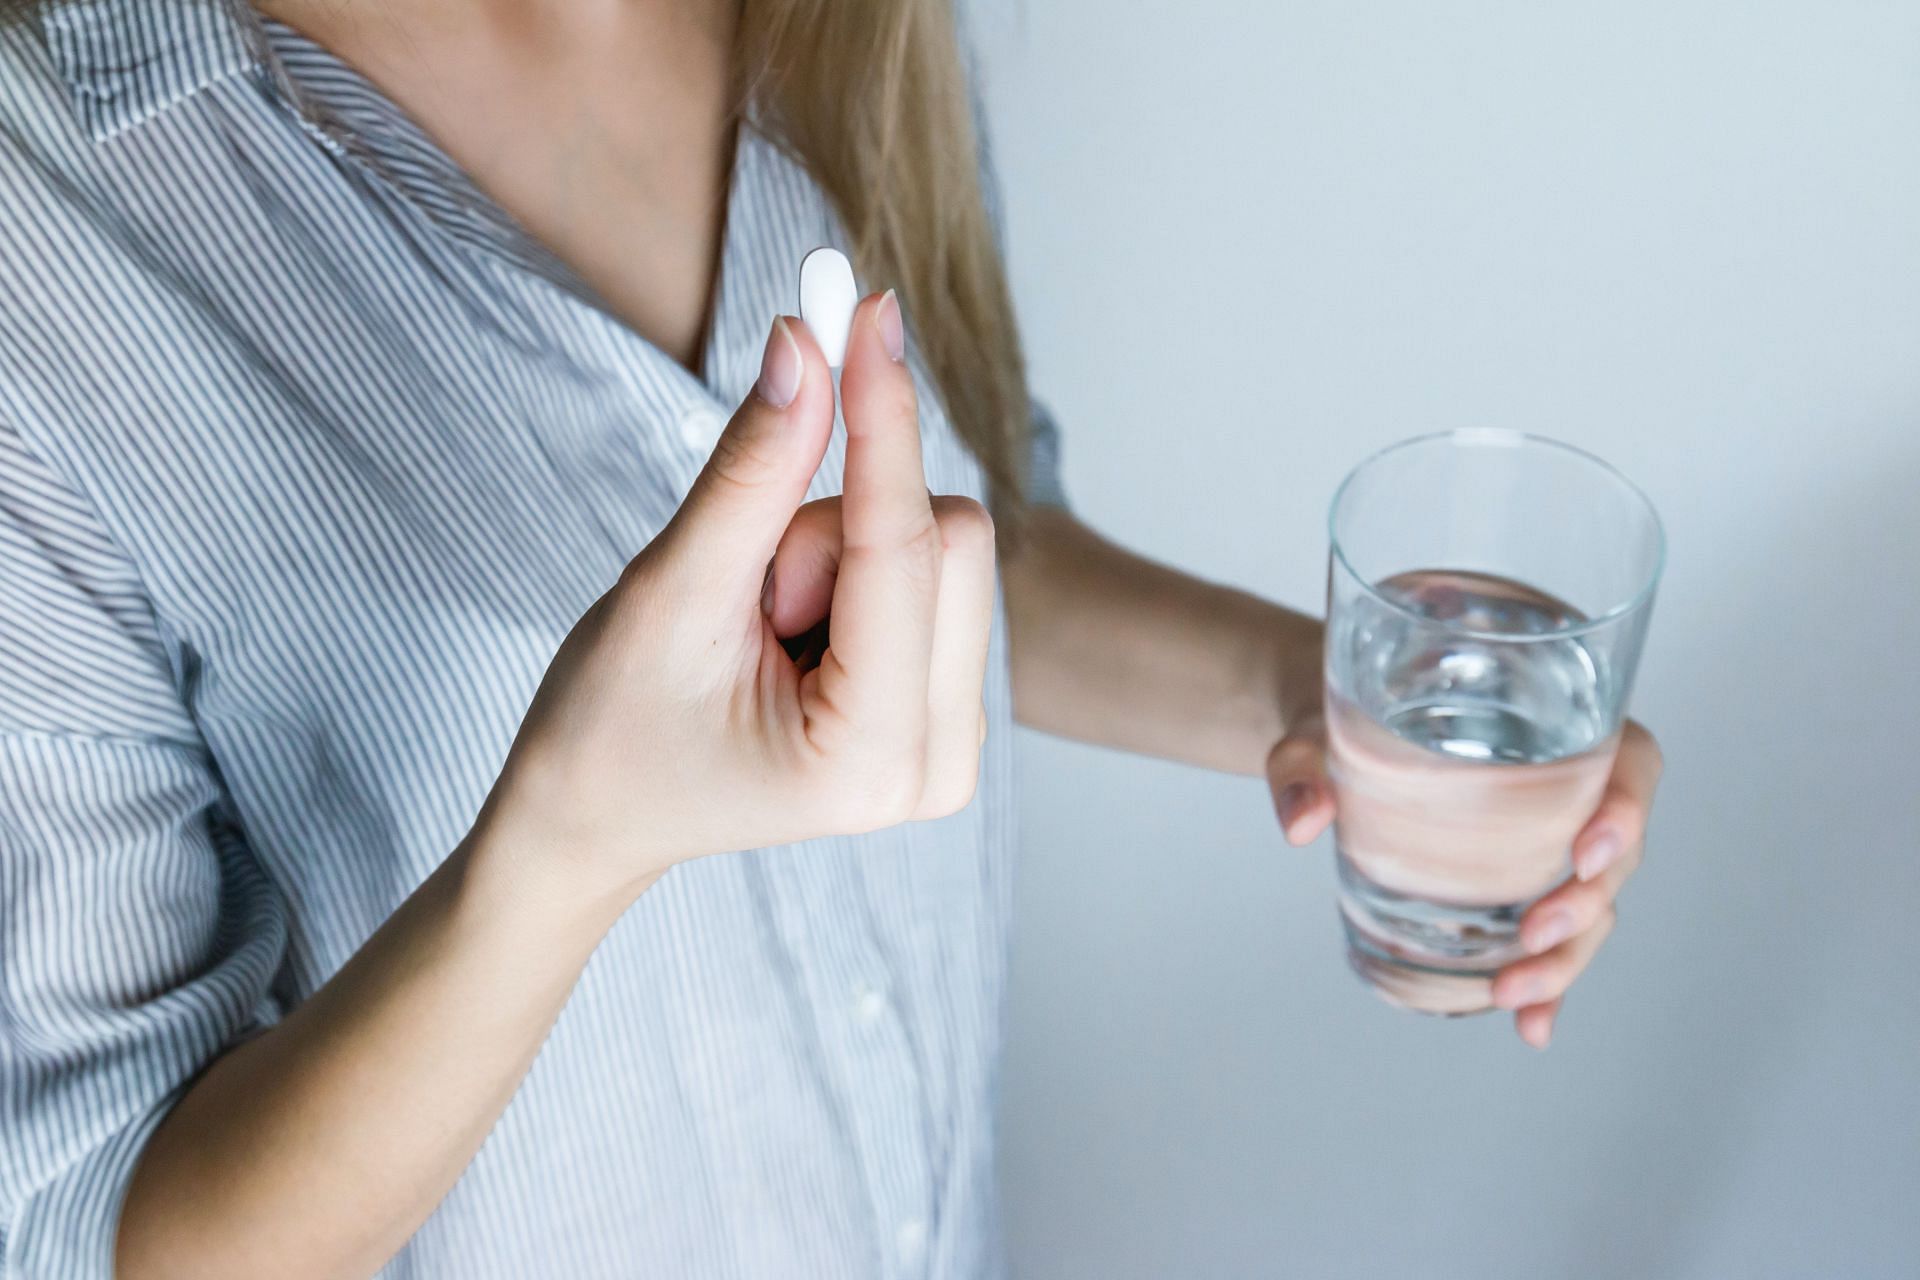 There can be minor side effects of consuming lipozene. (Image by Jeshootscom / Pexels)